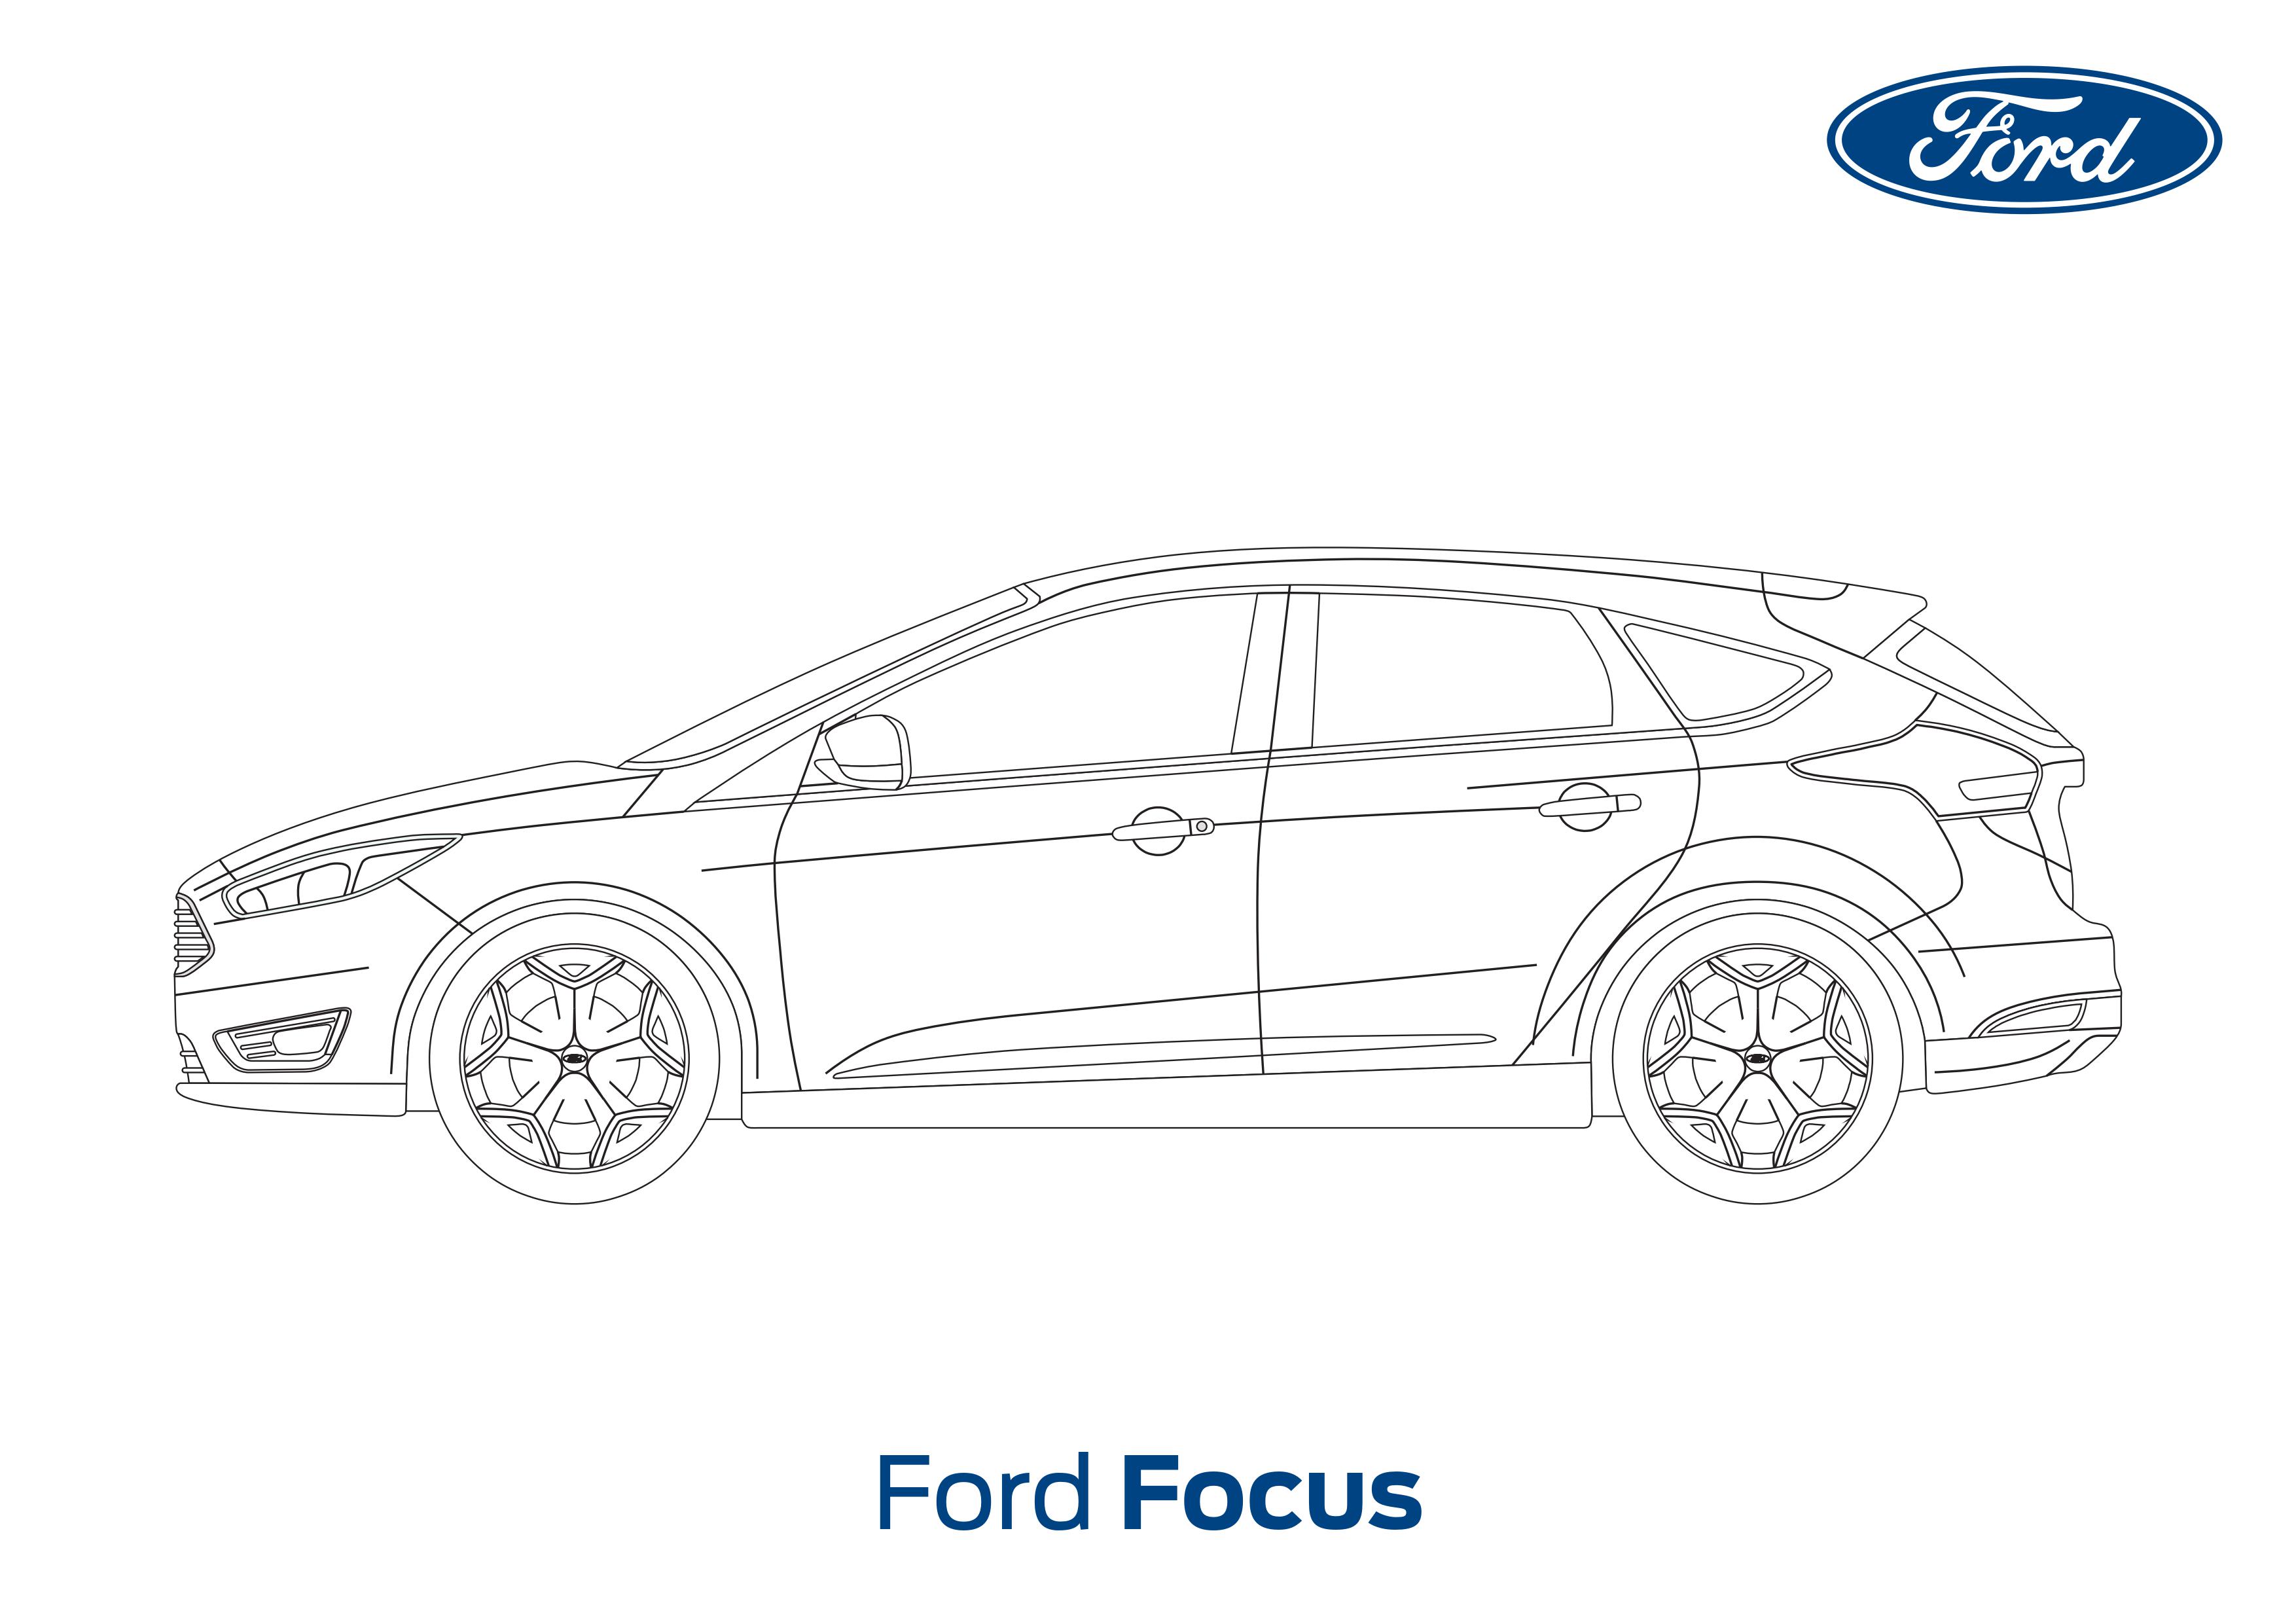 Ford Focus Colouring Sheet